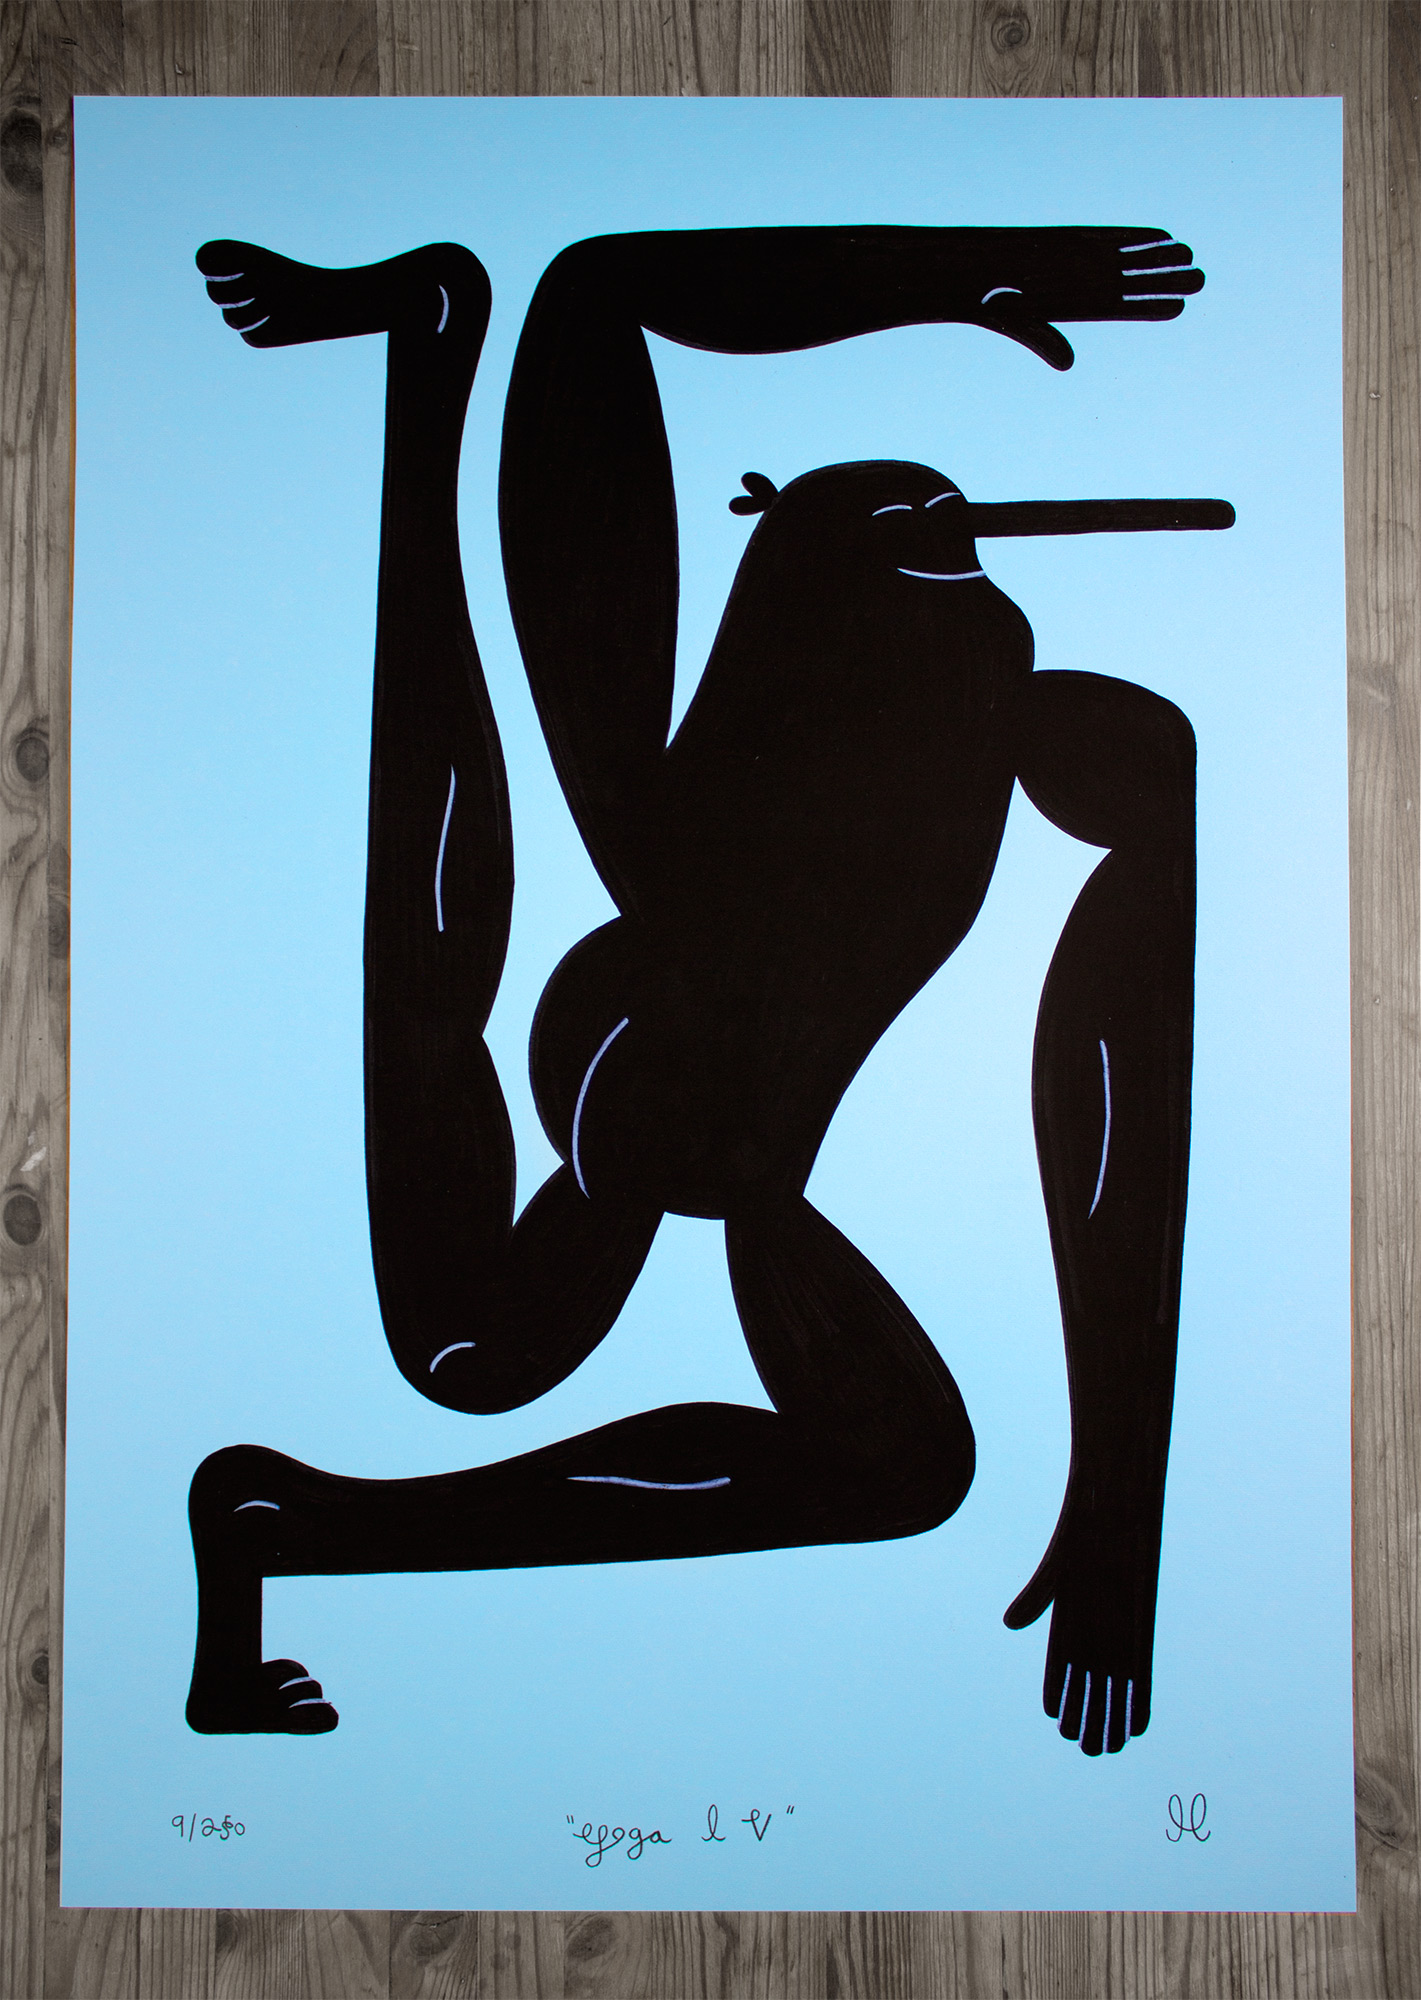 posters-prints, giclee-print, family-friendly, figurative, illustrative, monochrome, pop, portraiture, bodies, humor, movement, people, black, blue, ink, paper, abstract-forms, amusing, black-and-white, contemporary-art, copenhagen, danish, decorative, design, interior, interior-design, men, modern, modern-art, nordic, posters, prints, scandinavien, street-art, Buy original high quality art. Paintings, drawings, limited edition prints & posters by talented artists.